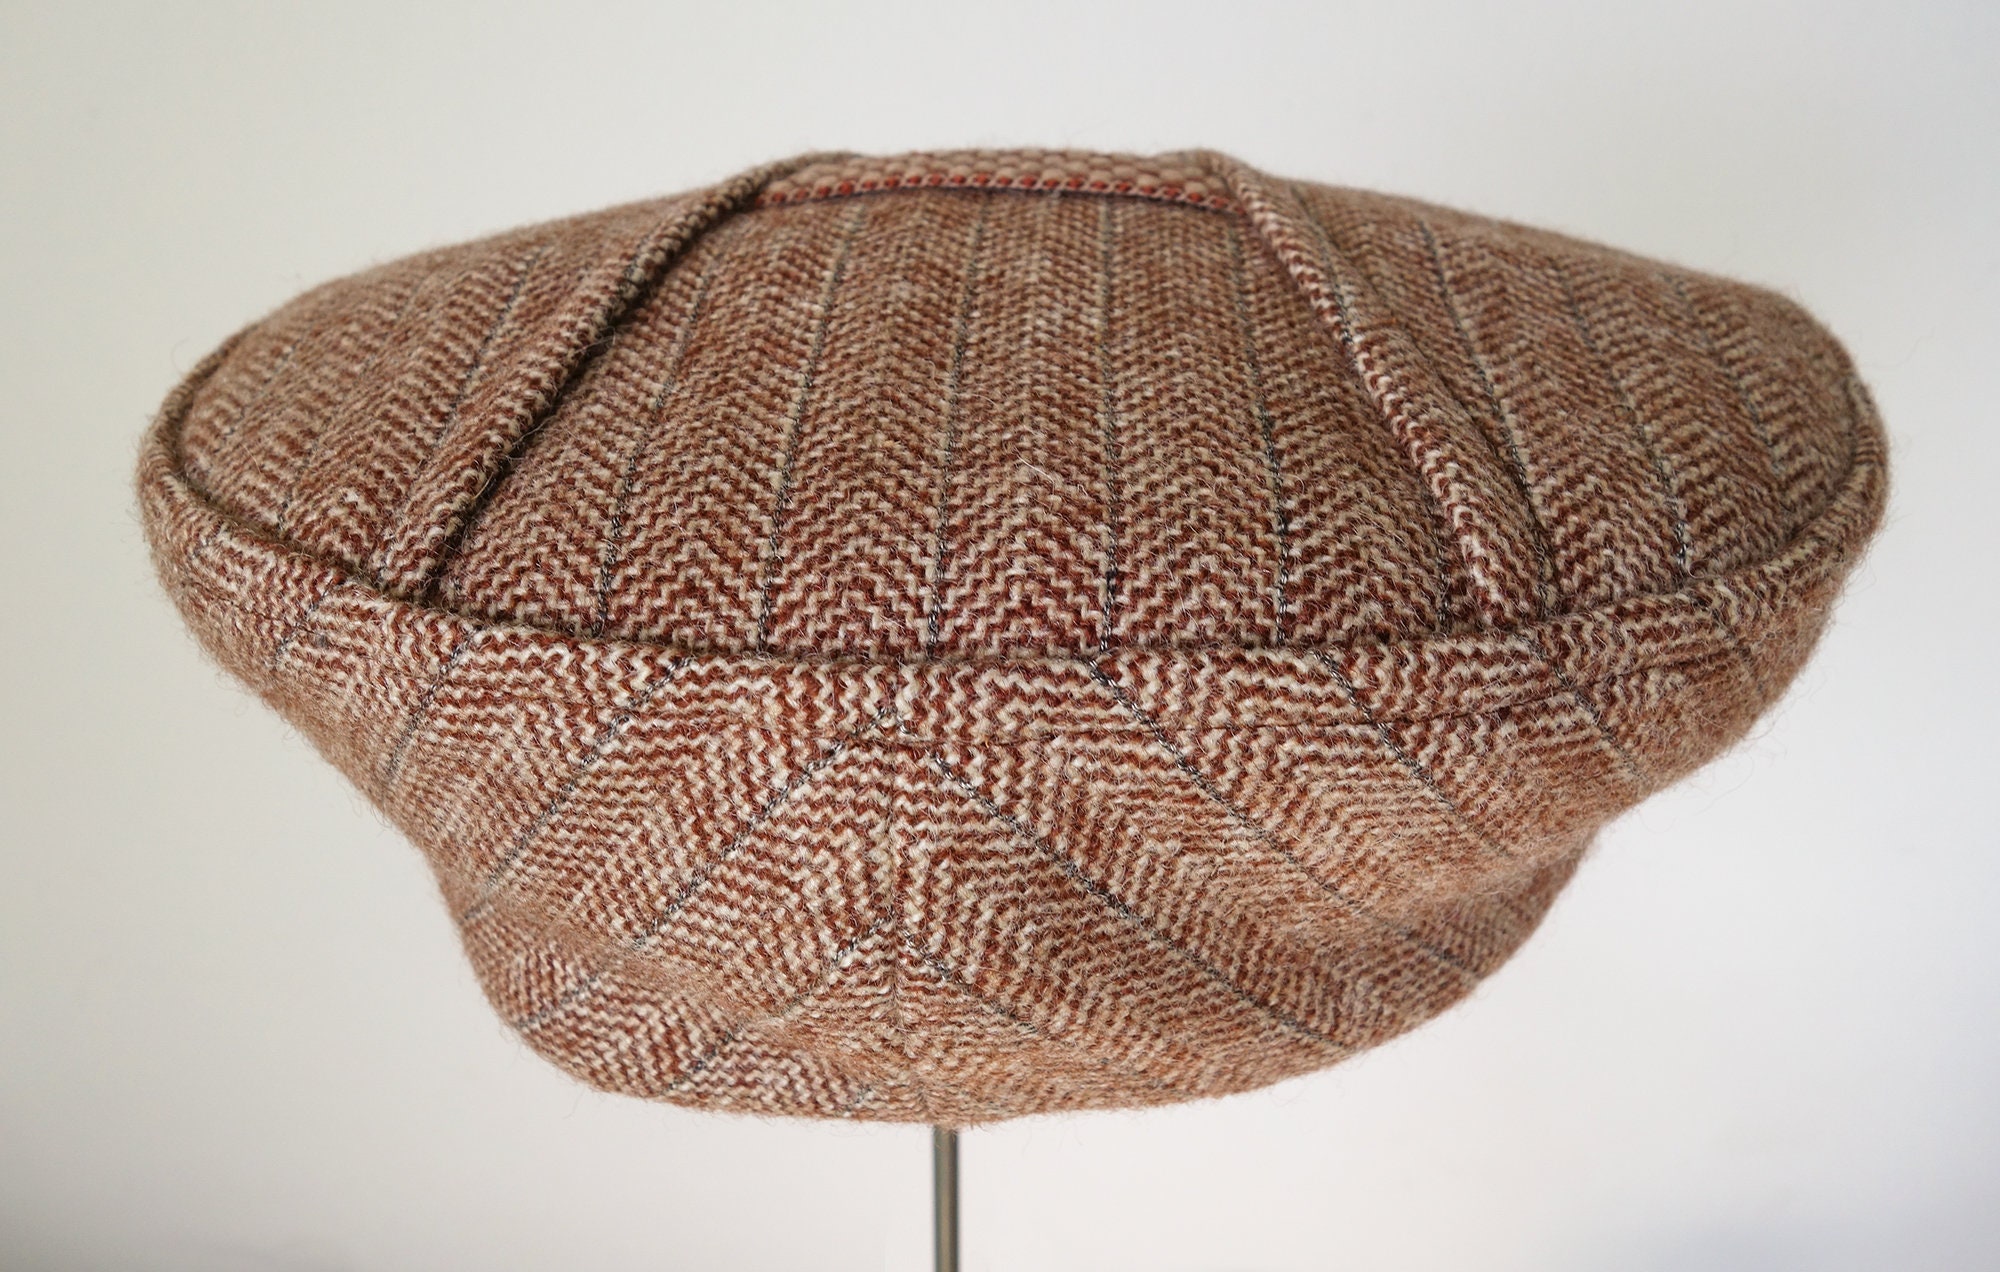 The SAVOY Novelty 1920s-design Flat Cap With V-top Detailing in 1930s  French Zigzag Herringbone Tweed and Vintage Ribbon Made to Order - Etsy